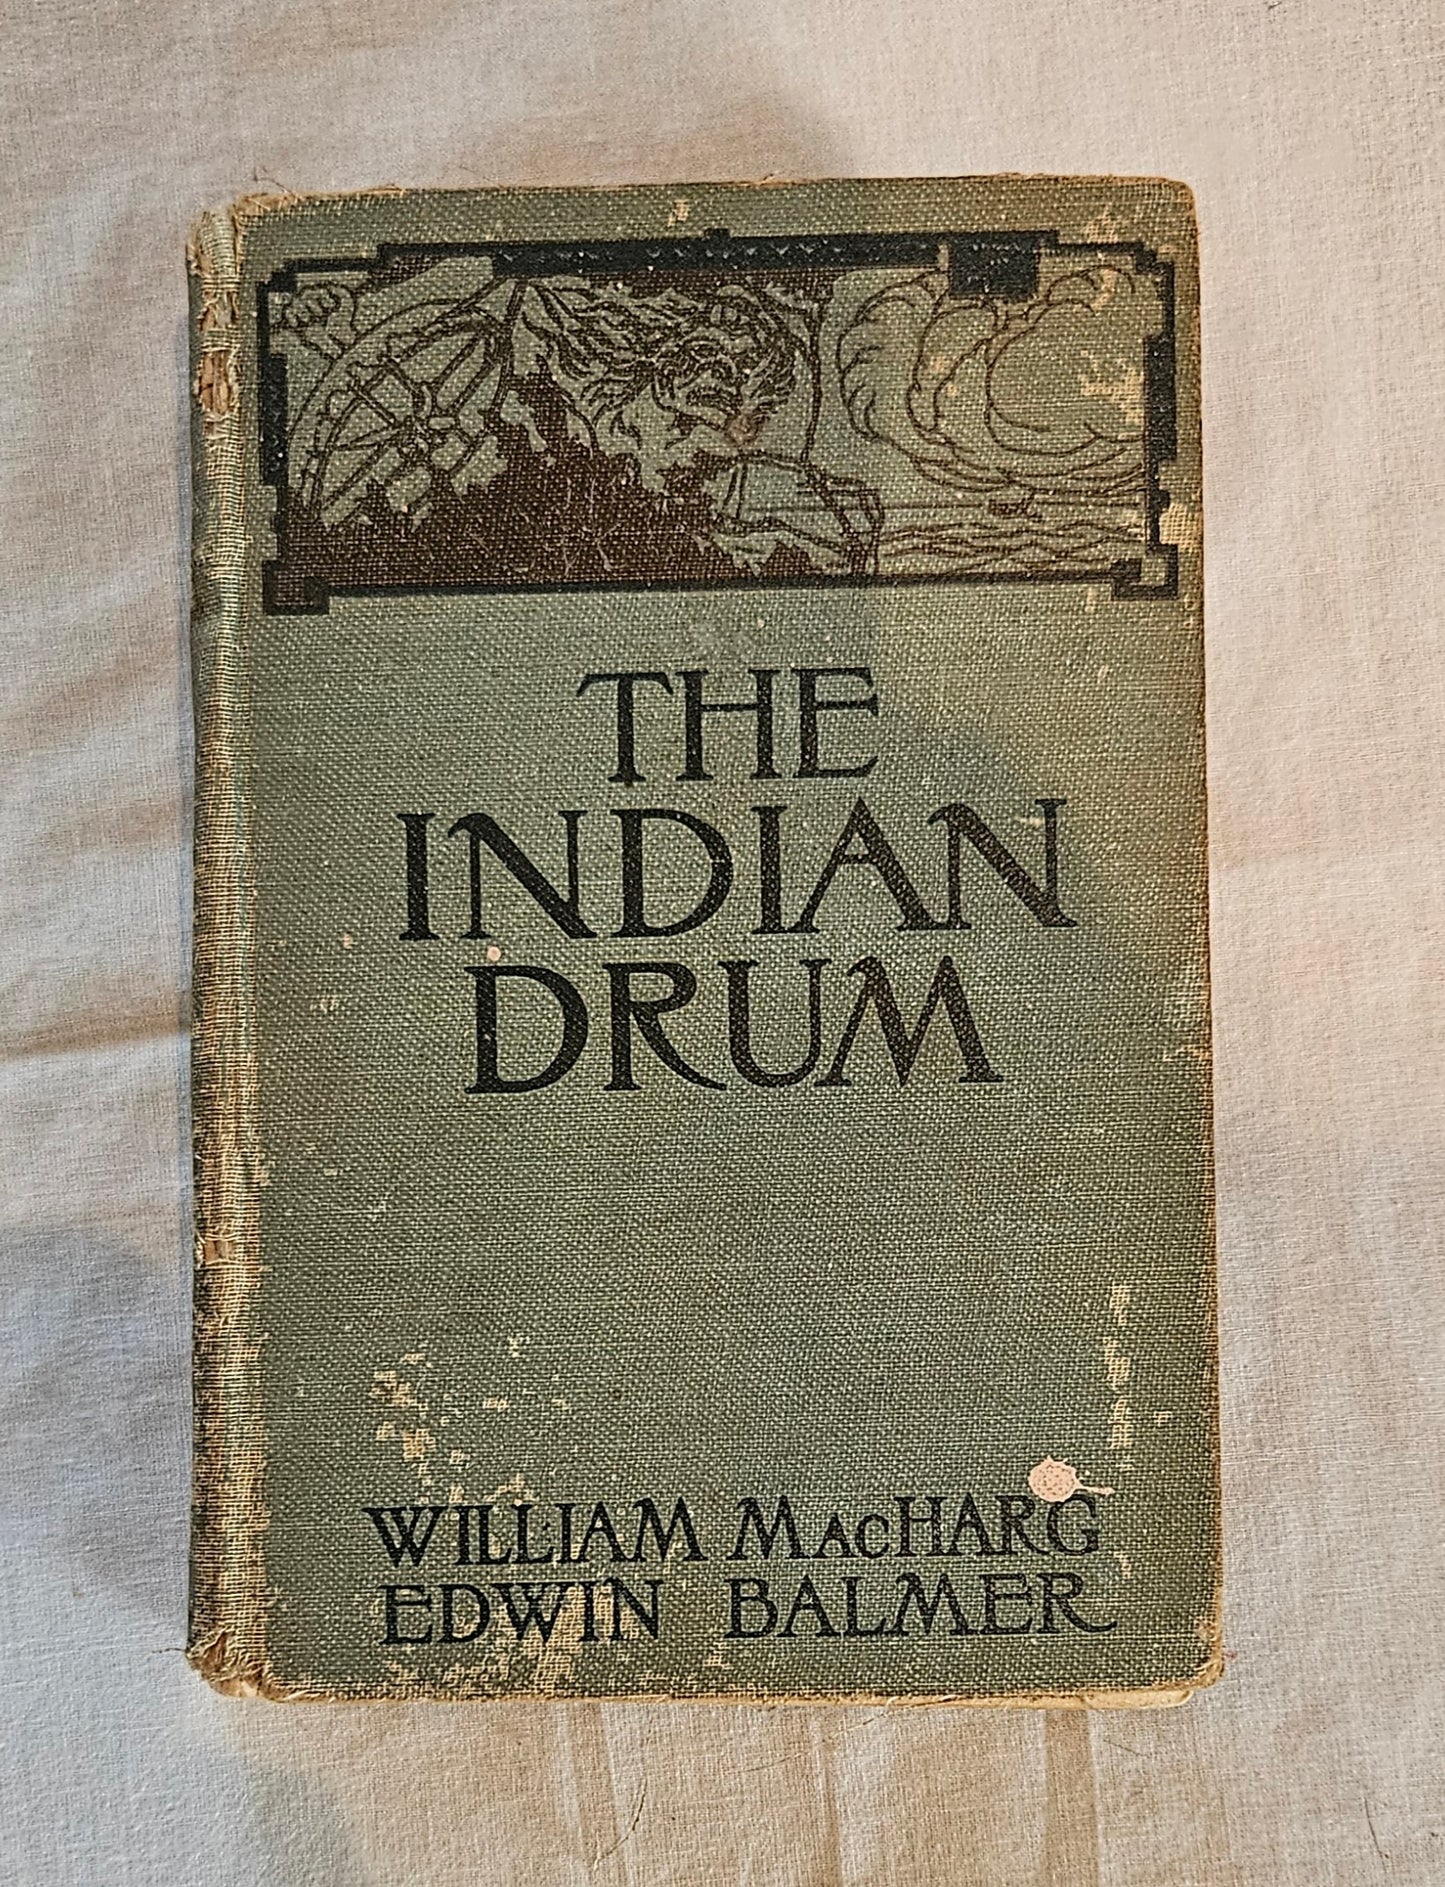 The Indian Drum by Edwin Balmer - 1917